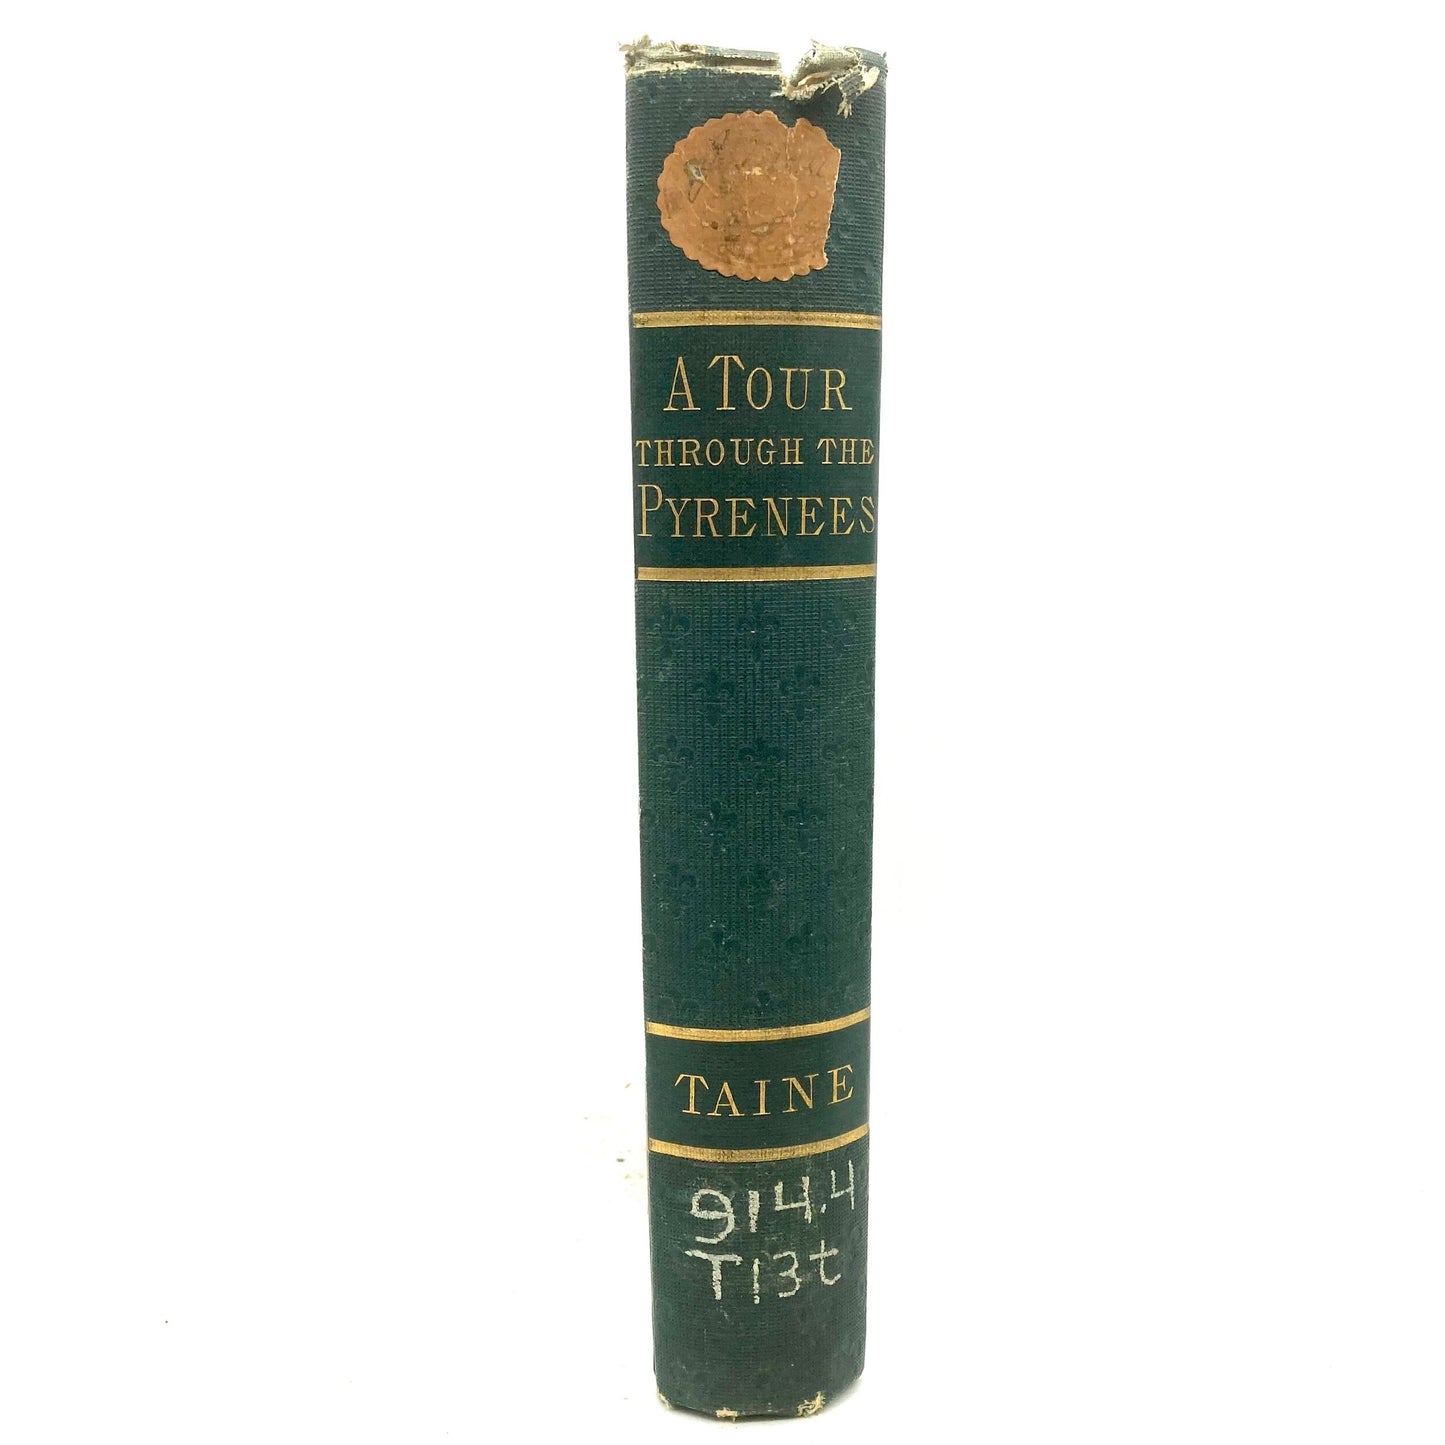 TAINE, Hippolite Adolphe "A Tour Through the Pyrenees" [Henry Holt, 1874] - Buzz Bookstore